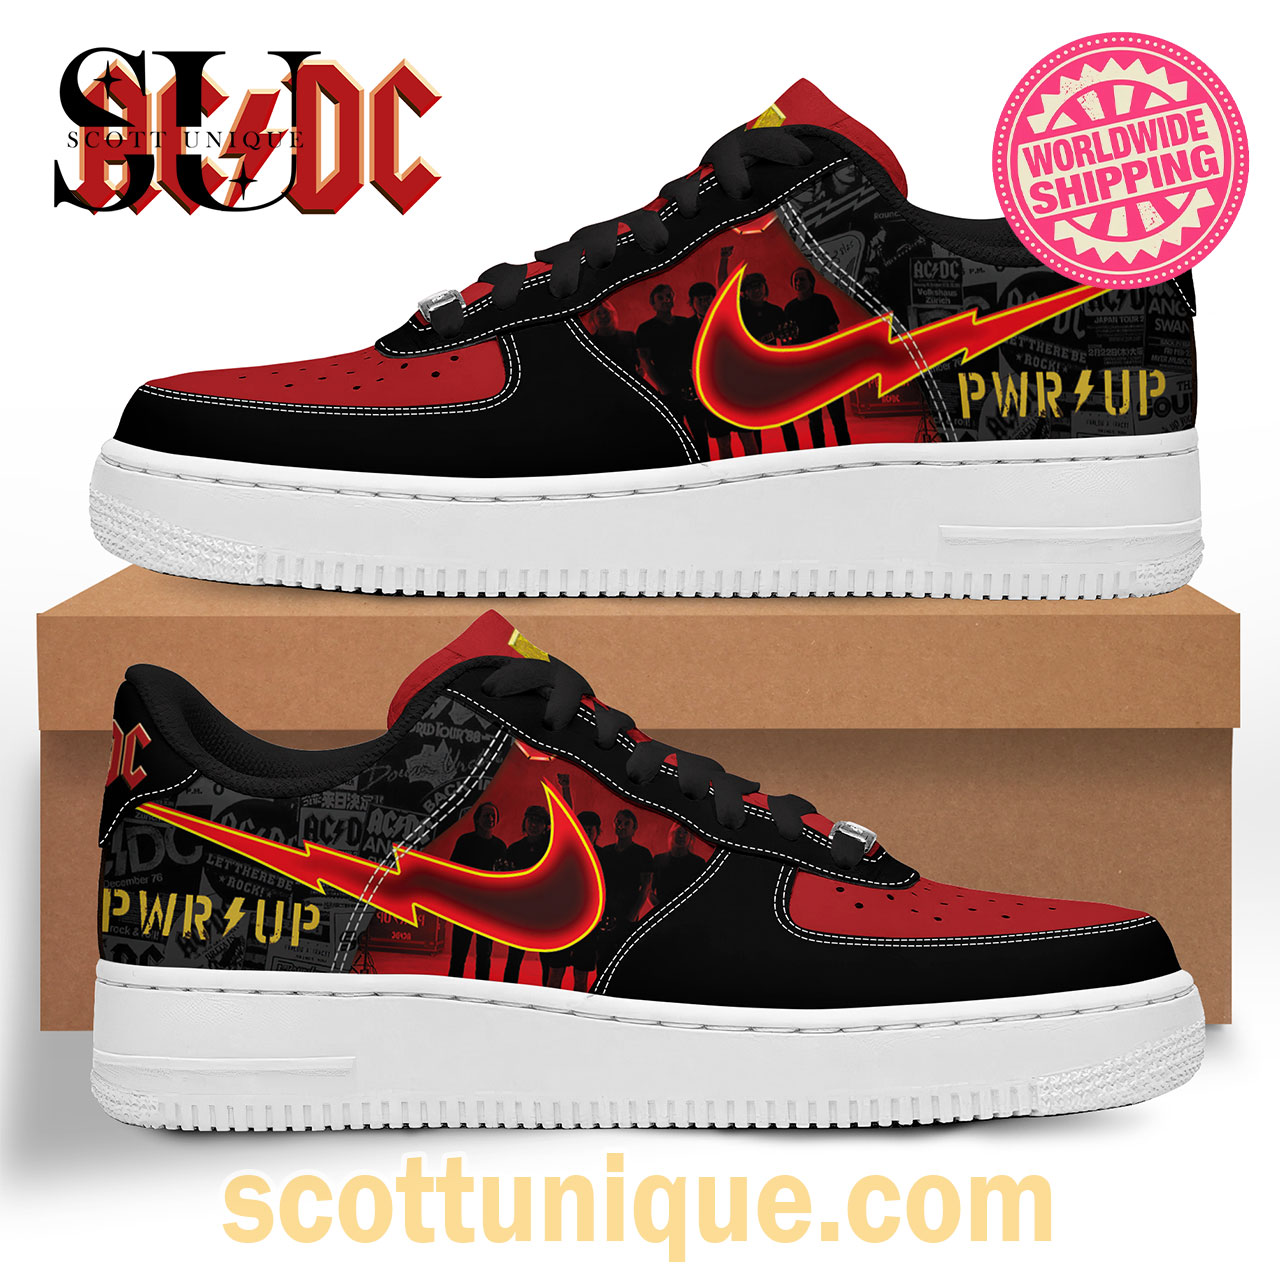 ACDC TOUR PWR UP Premium Nike Air Force 1 Shoes